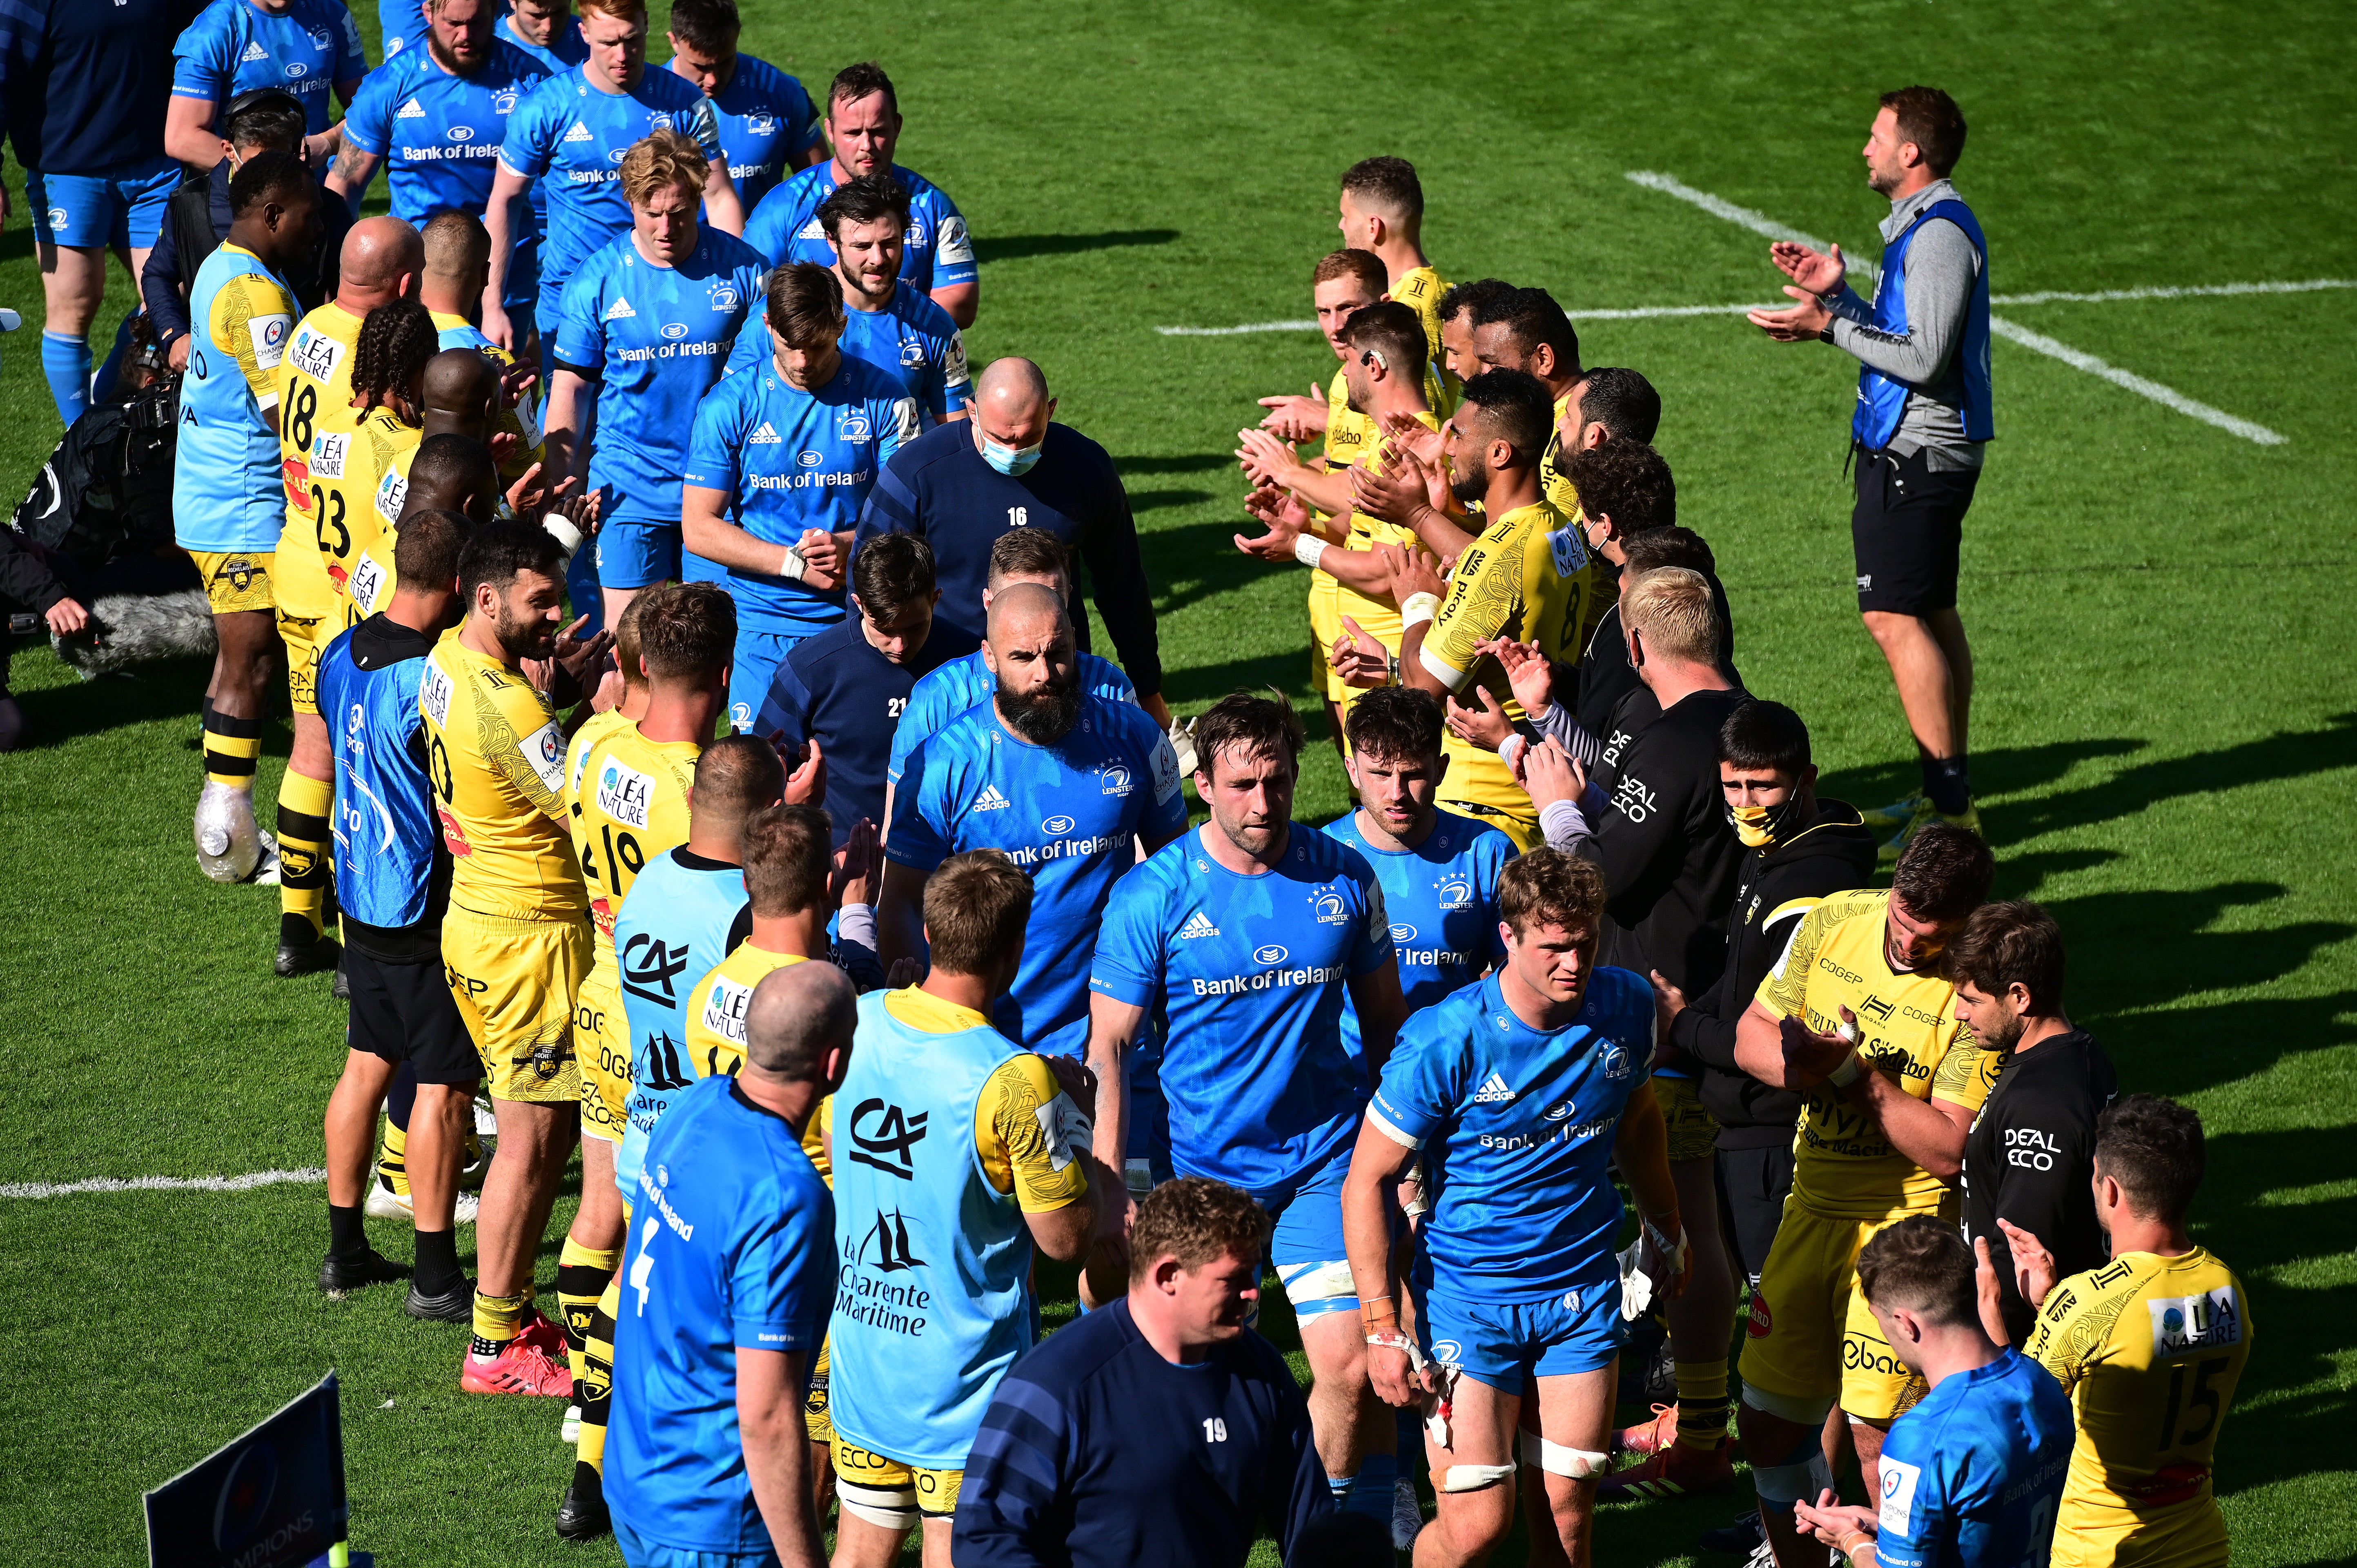 Leinster are four-time winners of the Champions Cup